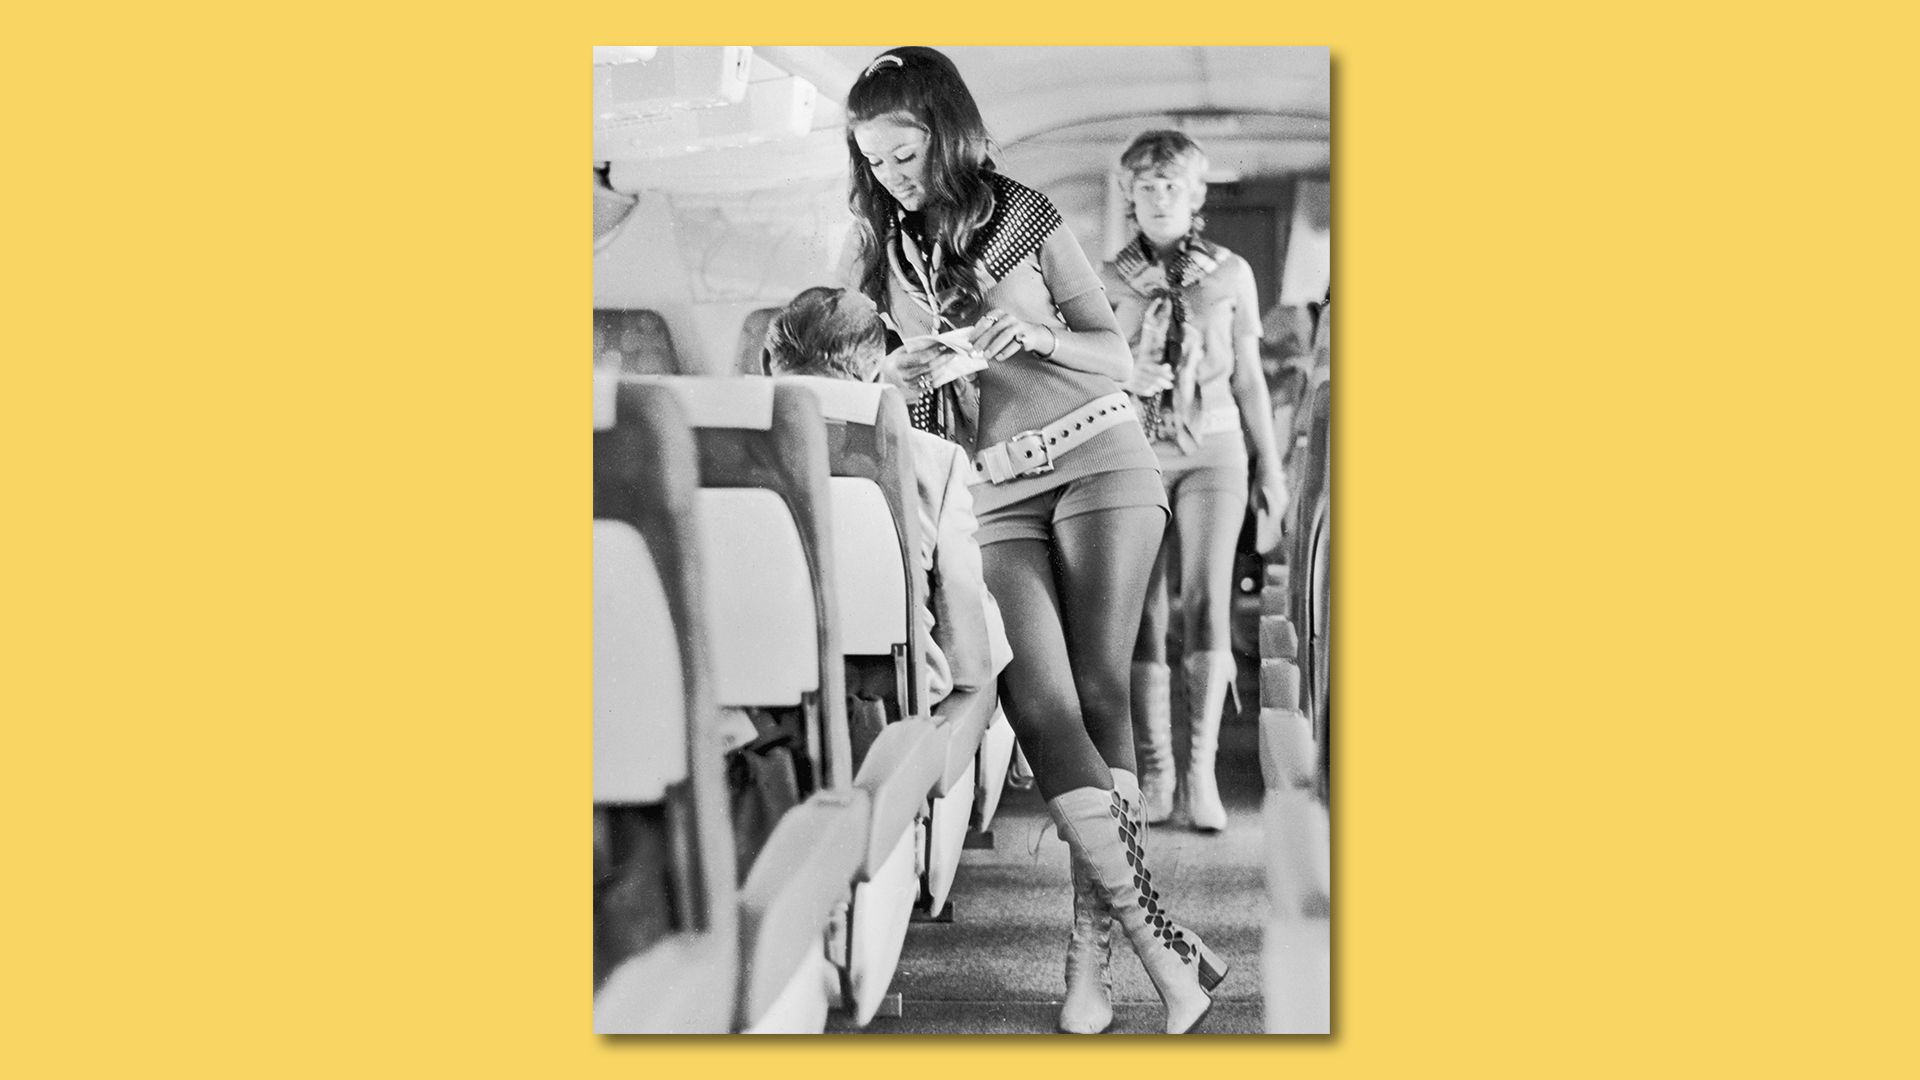 Circa 1972 image of 2 Southwest Airlines flight attendants wearing hot pants and go-go boots